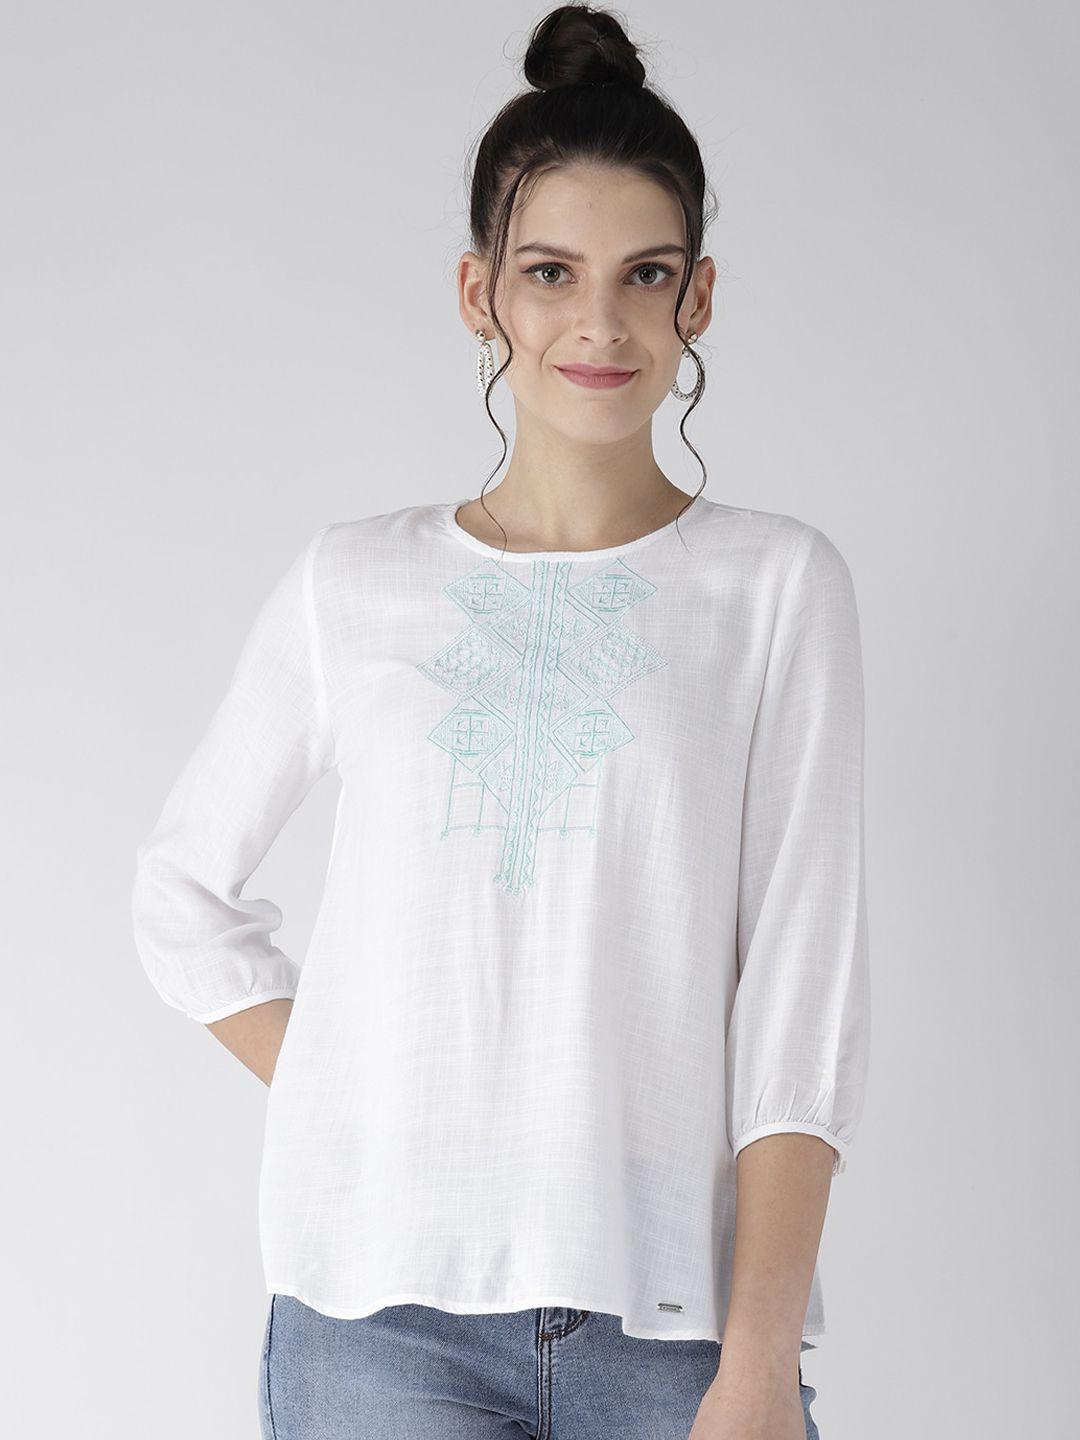 xpose-white-&-blue-geometric-embroidered-regular-top